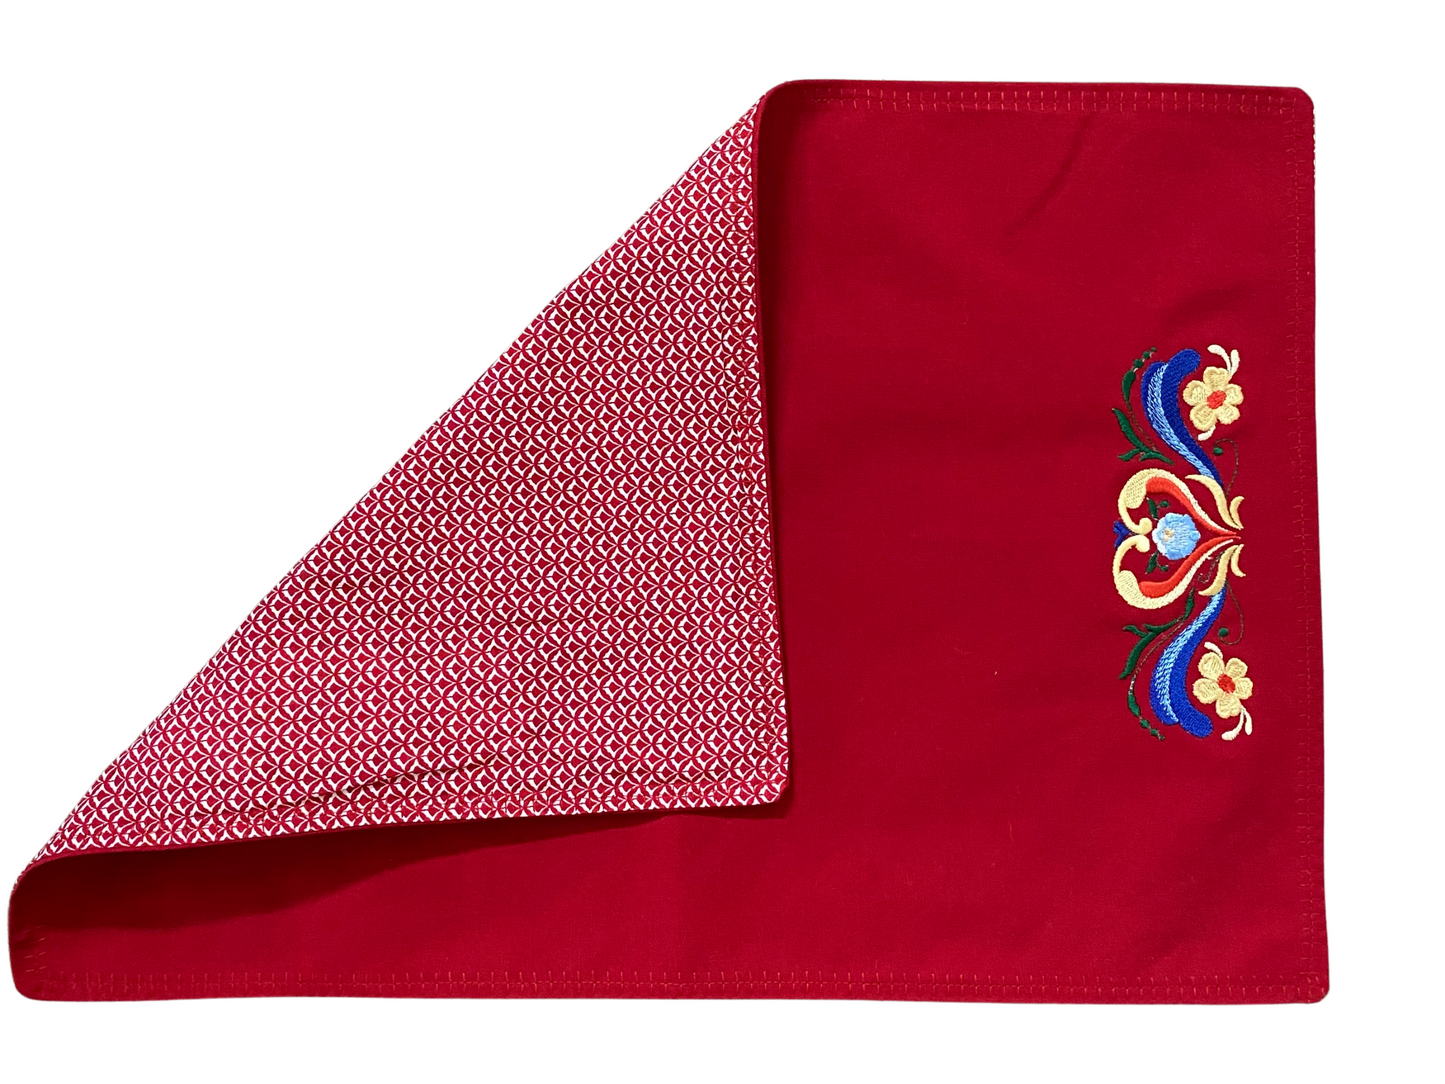 Embroidered Rosemaling Red Table Runner